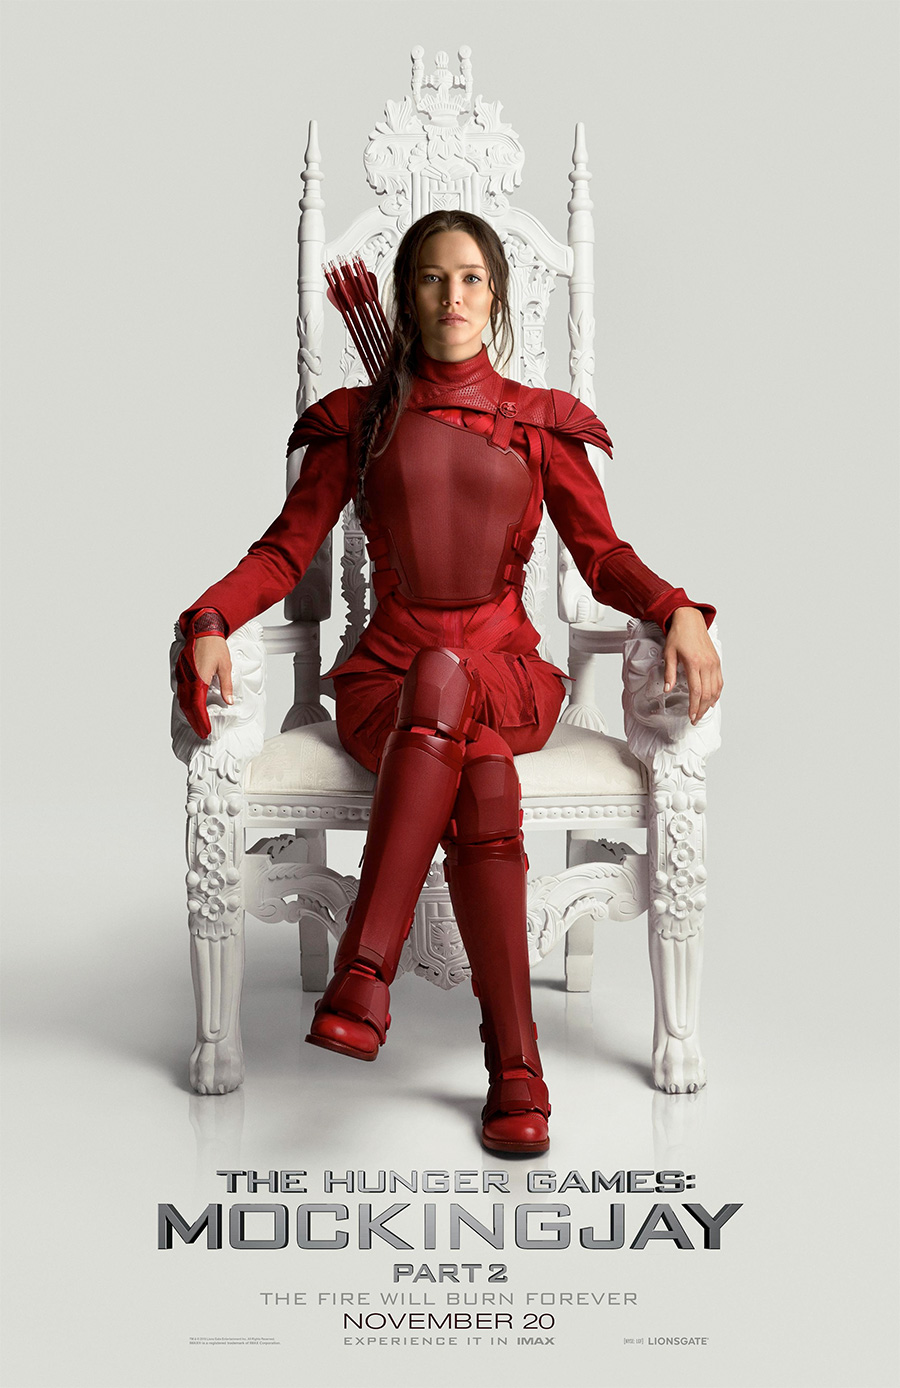 Five things The Hunger Games franchise brought to the world - NZ Herald